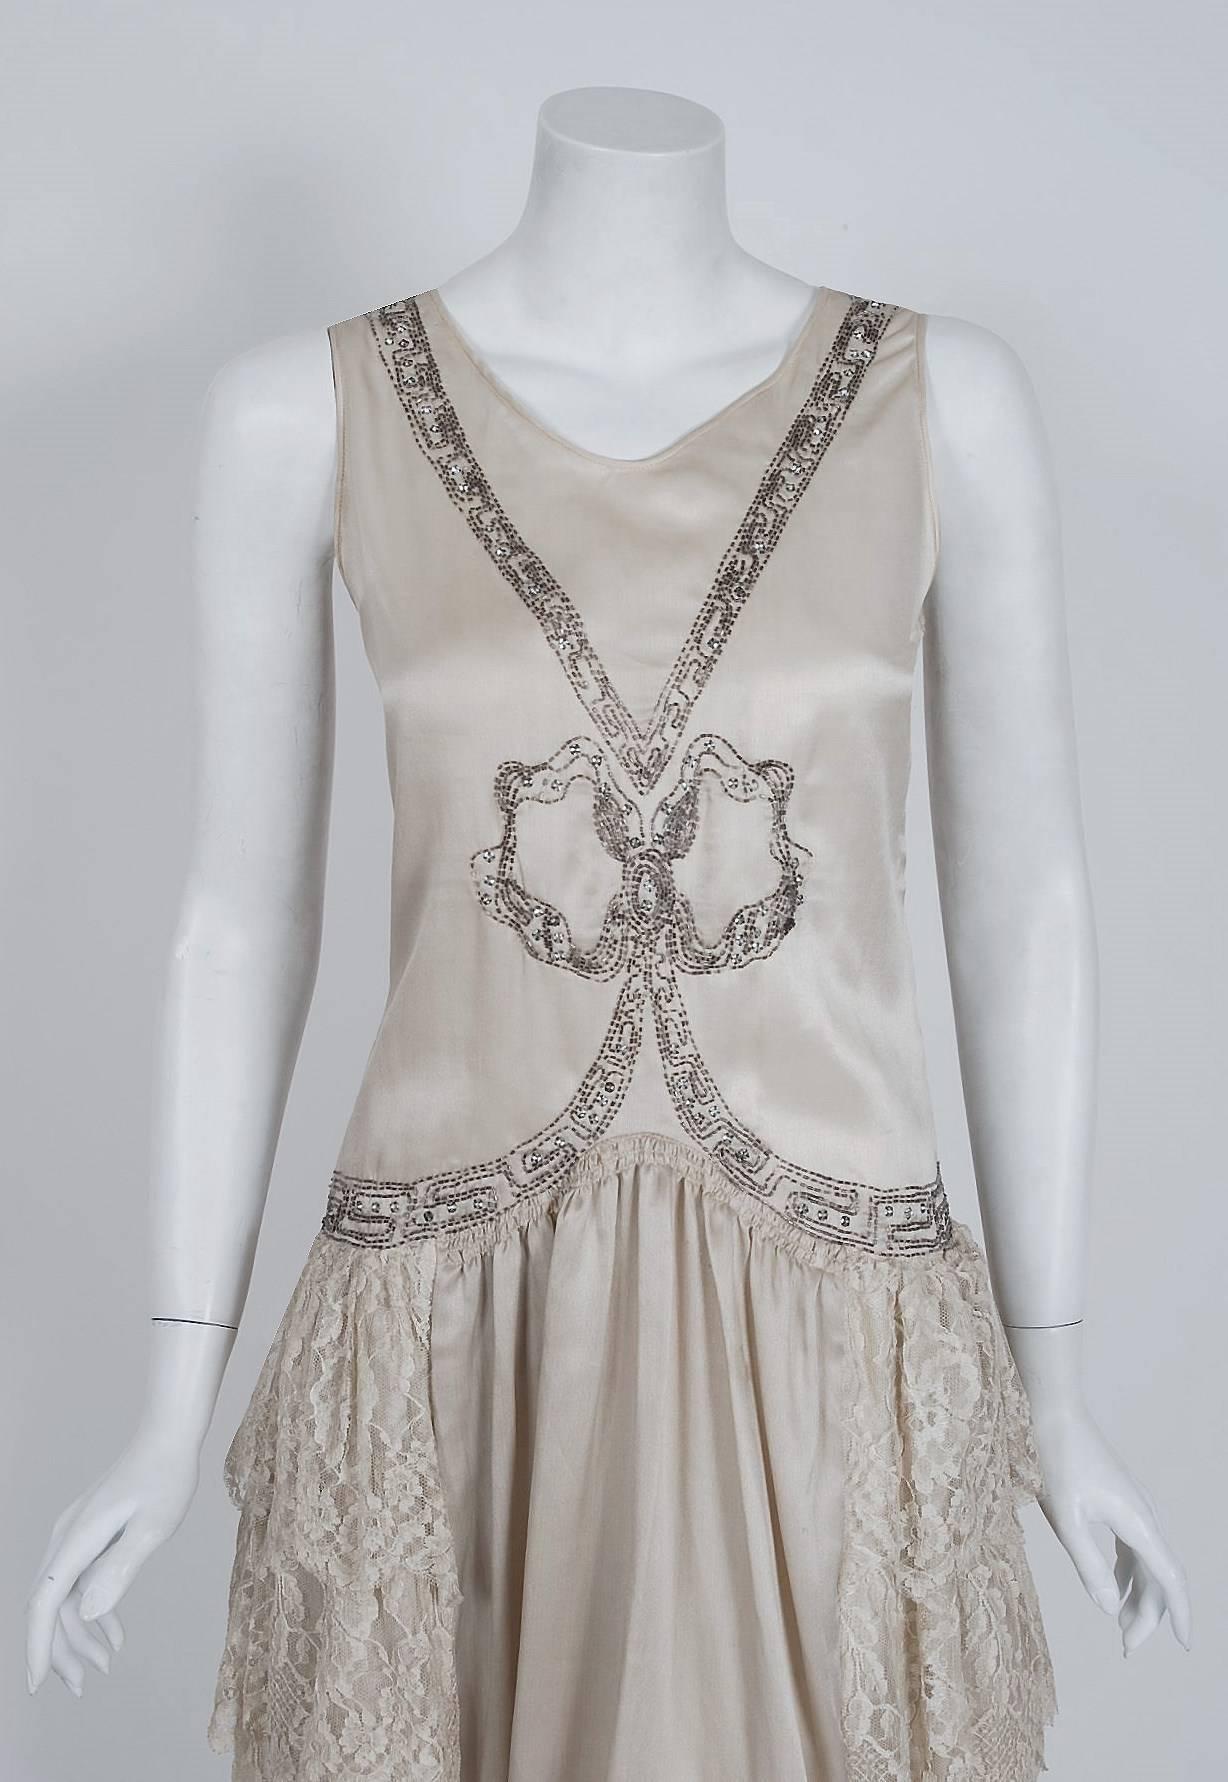 Romantic flapper dresses from the early 20th century are perennial favorites and this one is a show-stopper. The garment's simple unstructured style is so modern; the fine beadwork and mixed textiles are a treasure trove of needle art. This beauty,